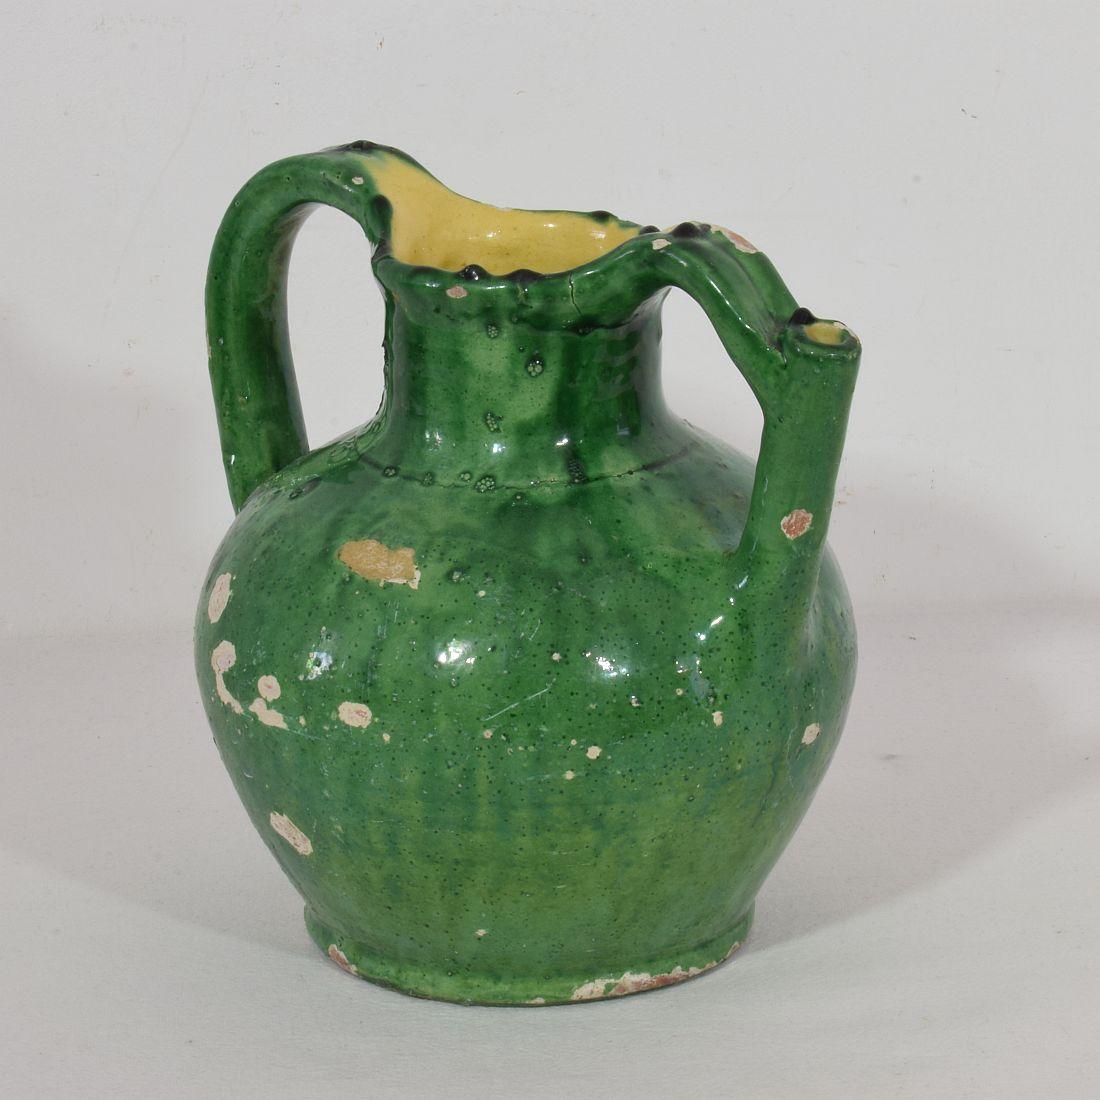 Great authentic and rare piece of pottery with a spout in handle from the Provence. Beautiful weathered and an amazing color. Imperfections help authenticate this water cruche as it was a utilitarian type piece, France, circa 1850.